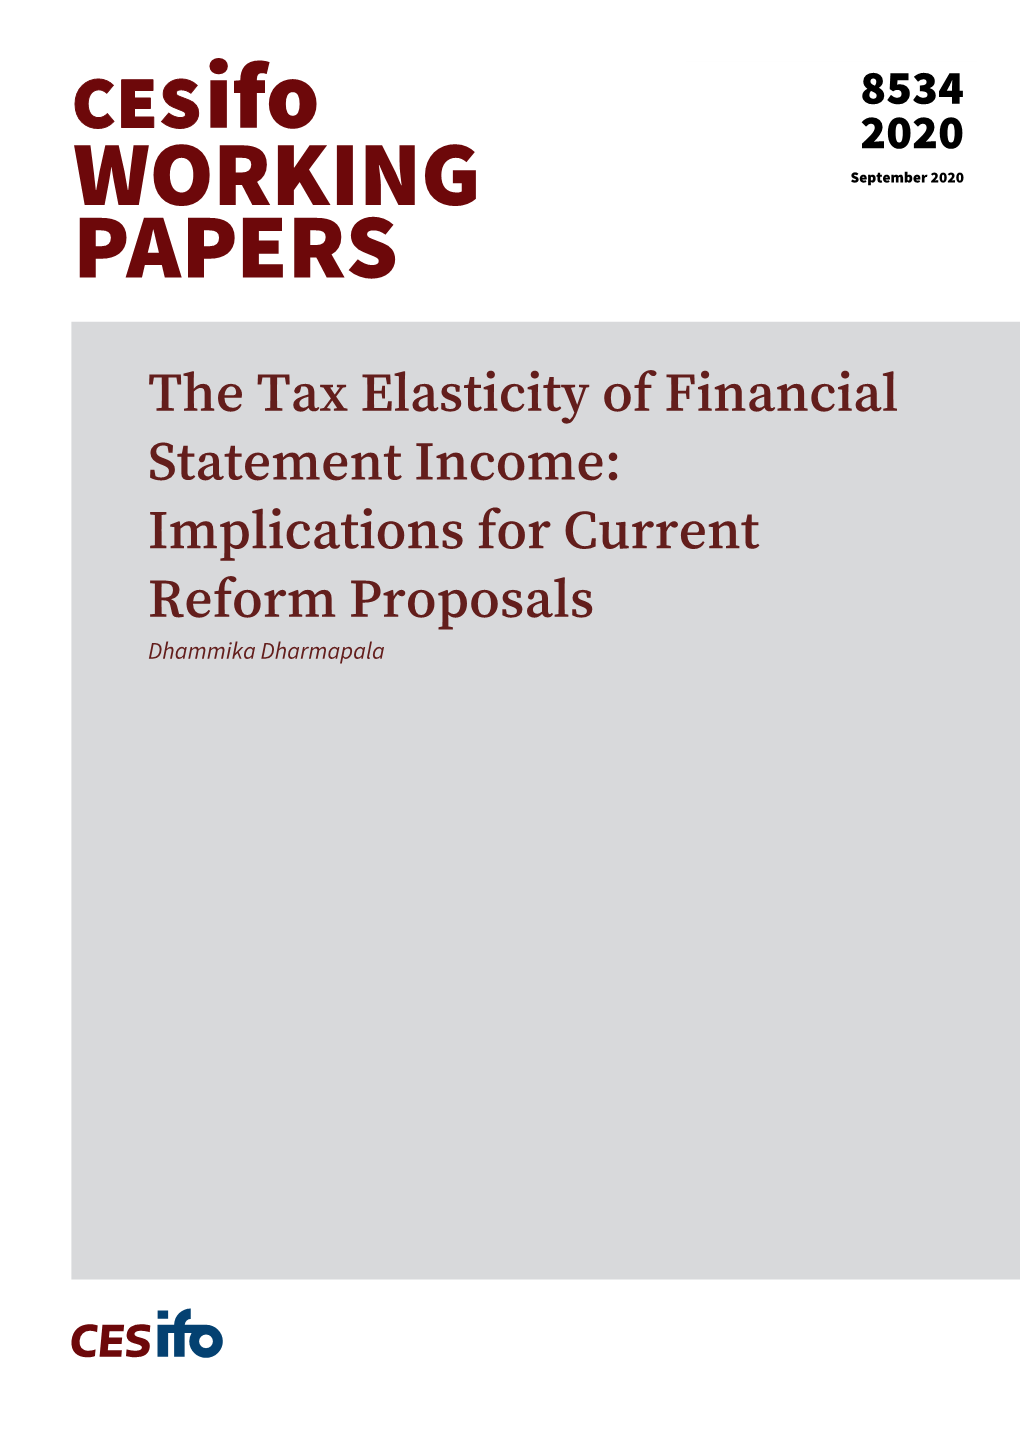 The Tax Elasticity of Financial Statement Income: Implications for Current Reform Proposals Dhammika Dharmapala Impressum